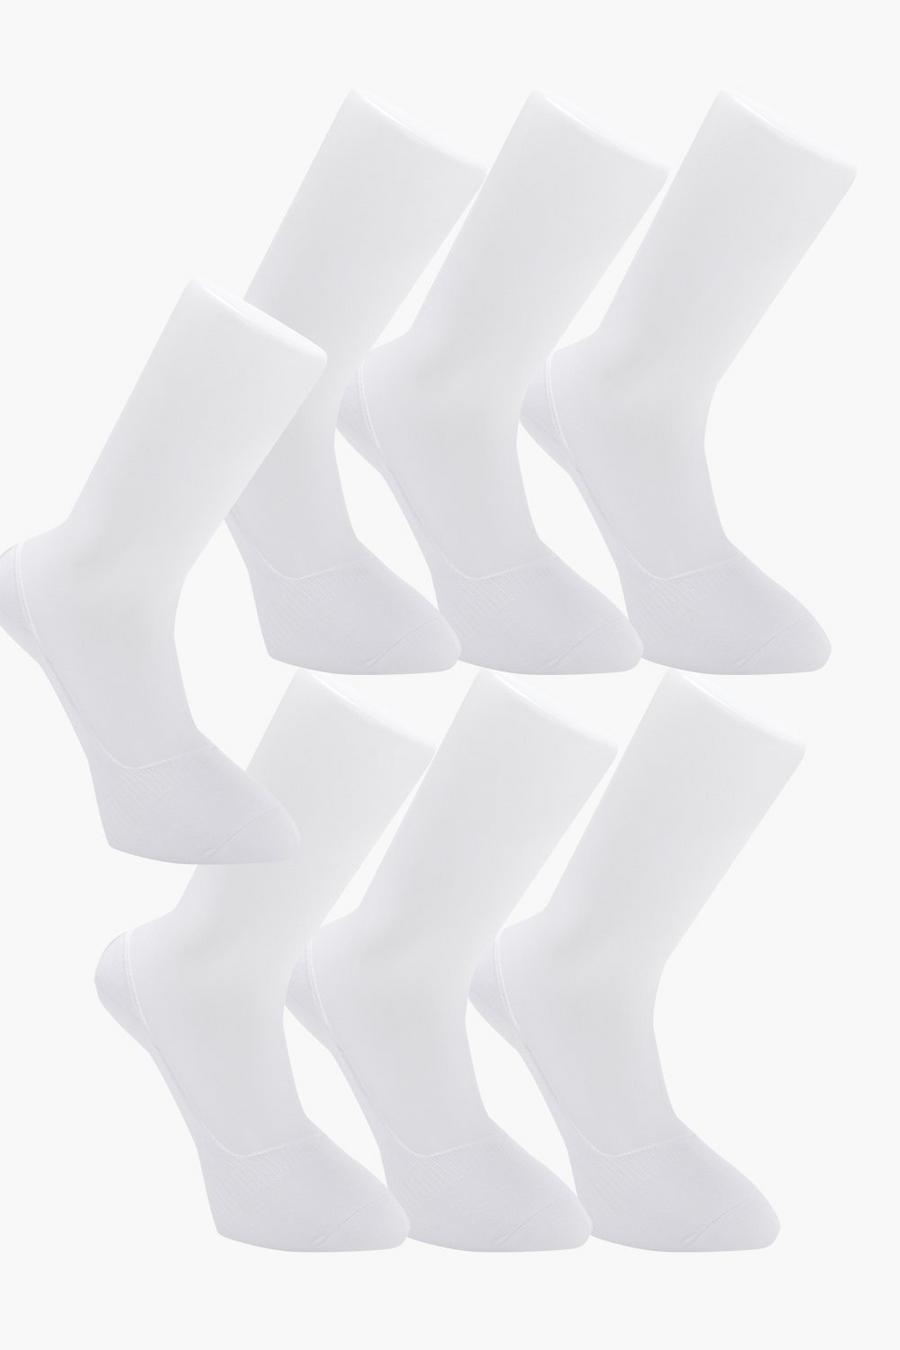 Pack de 7 calcetines invisibles antideslizantes blancos image number 1